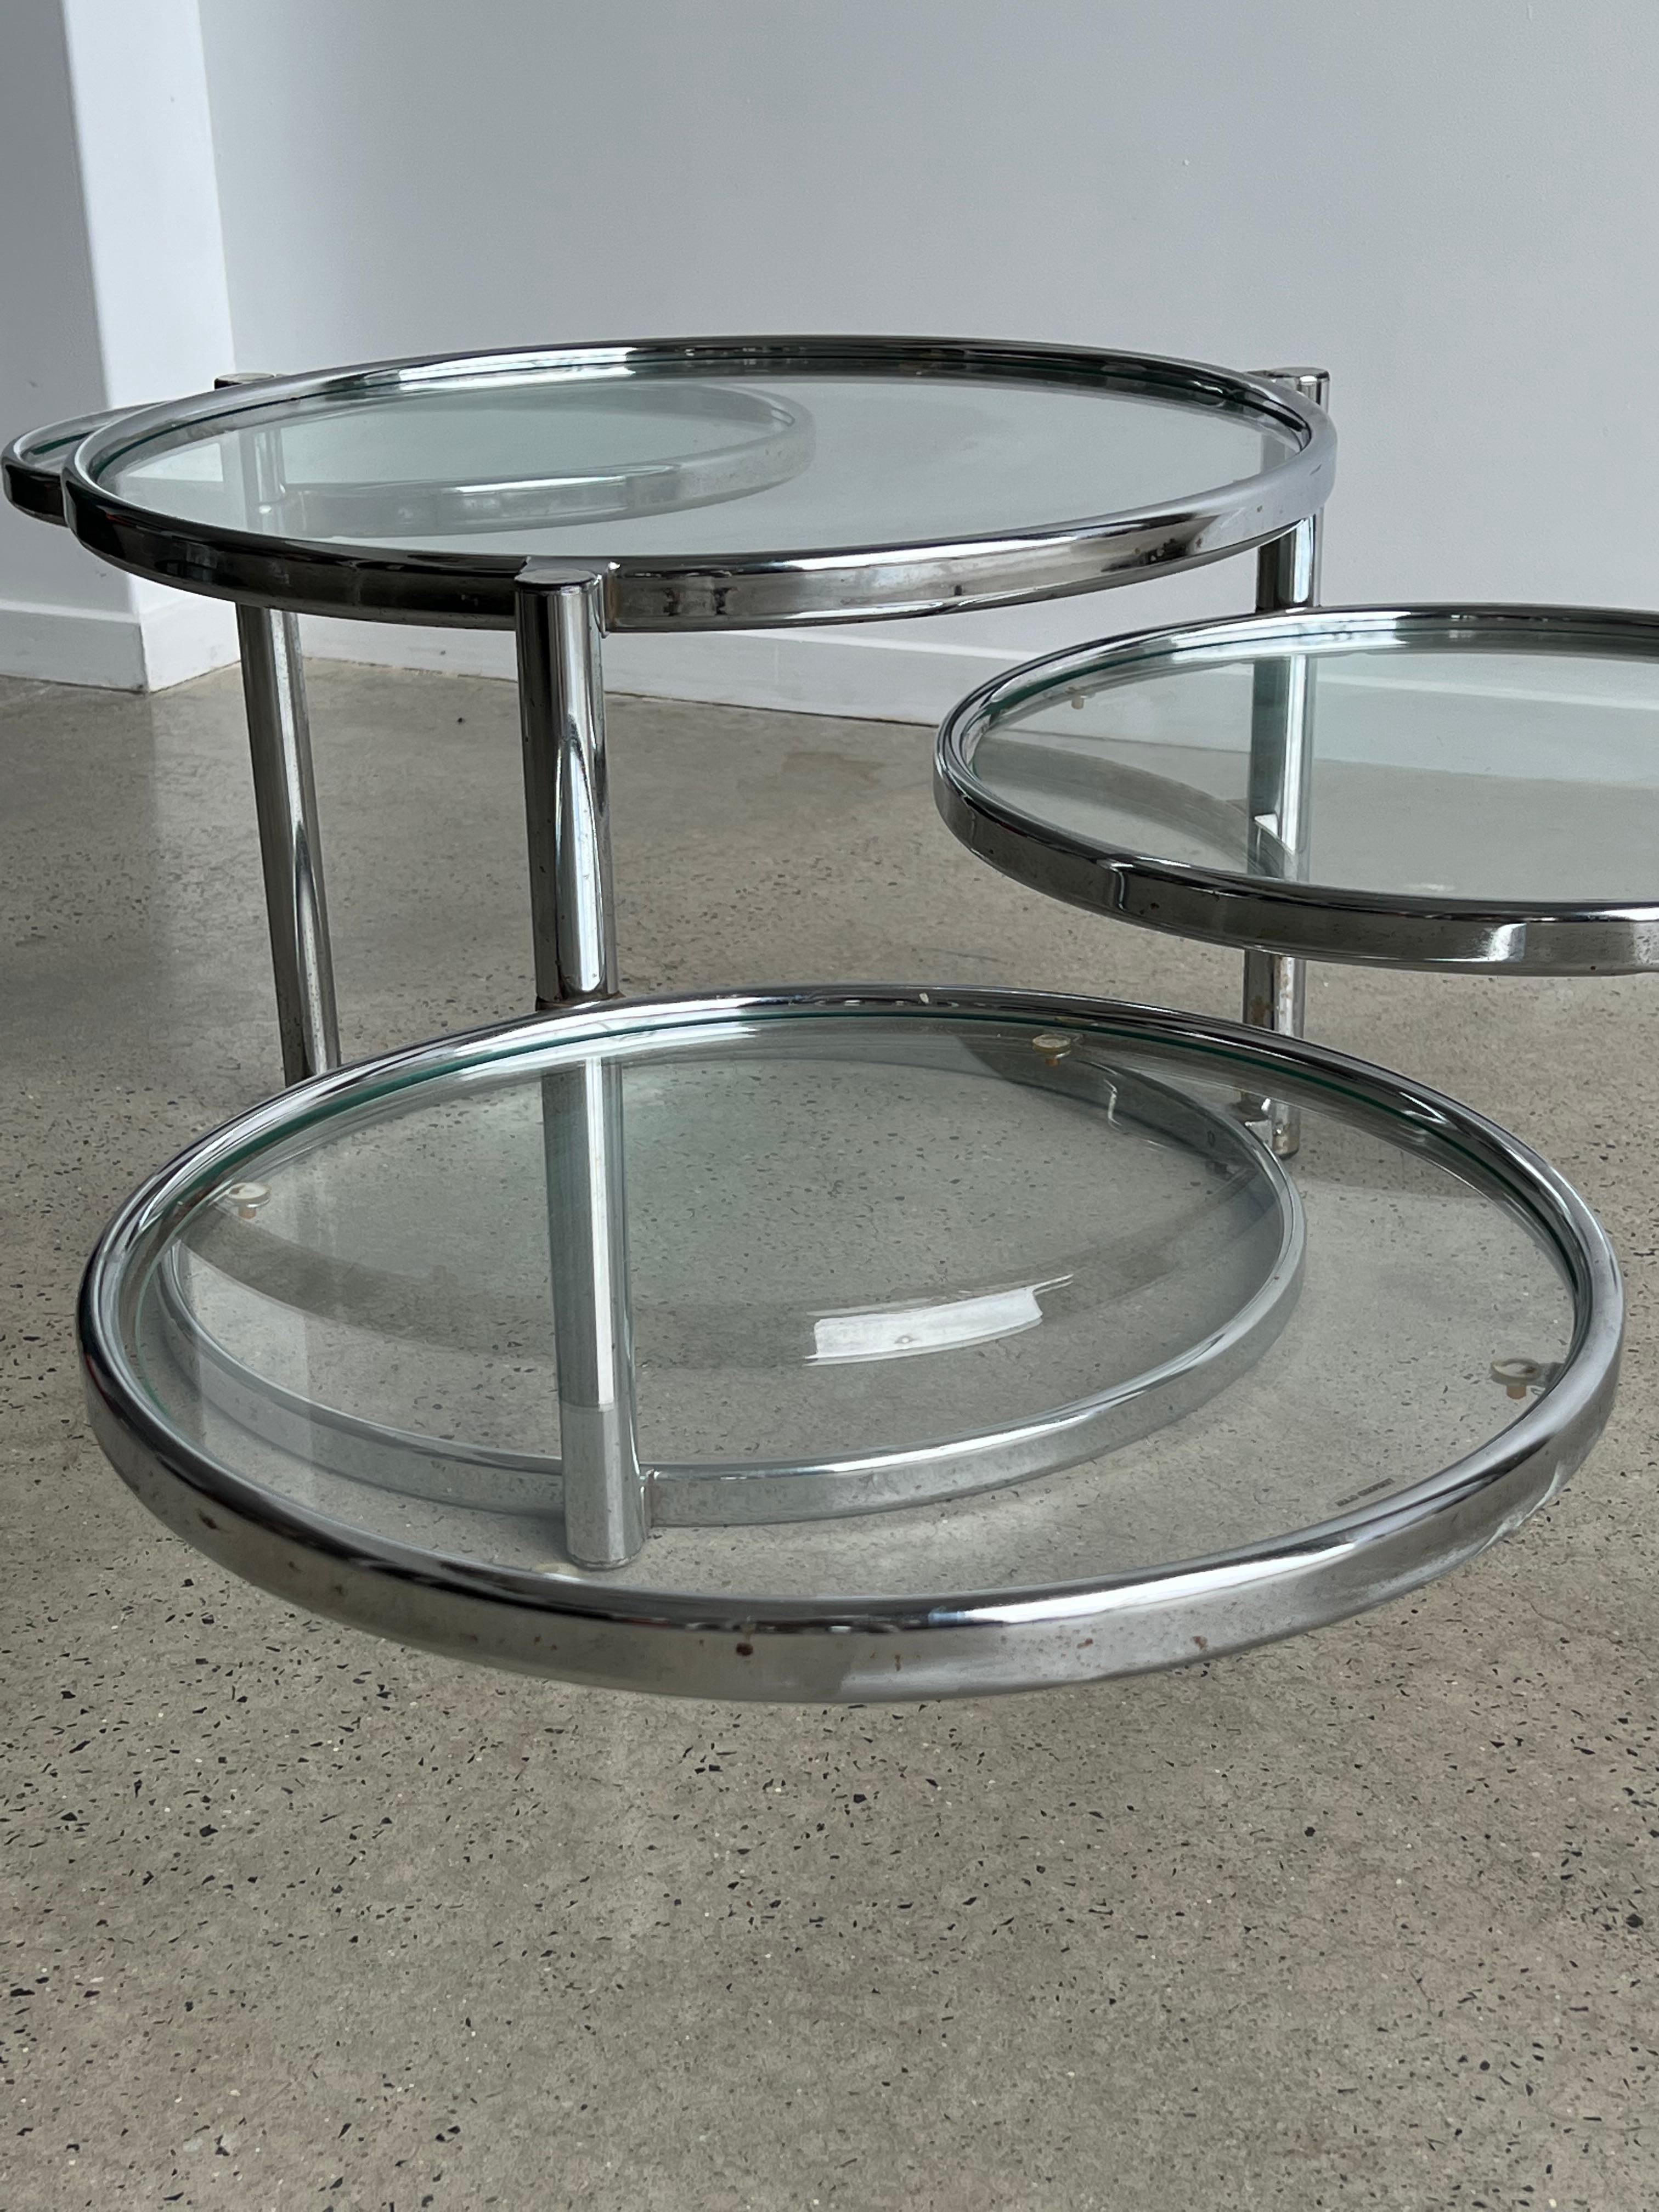 Stunning Morex 1970s convertible coffee table in glass and chrome four different glass levels.